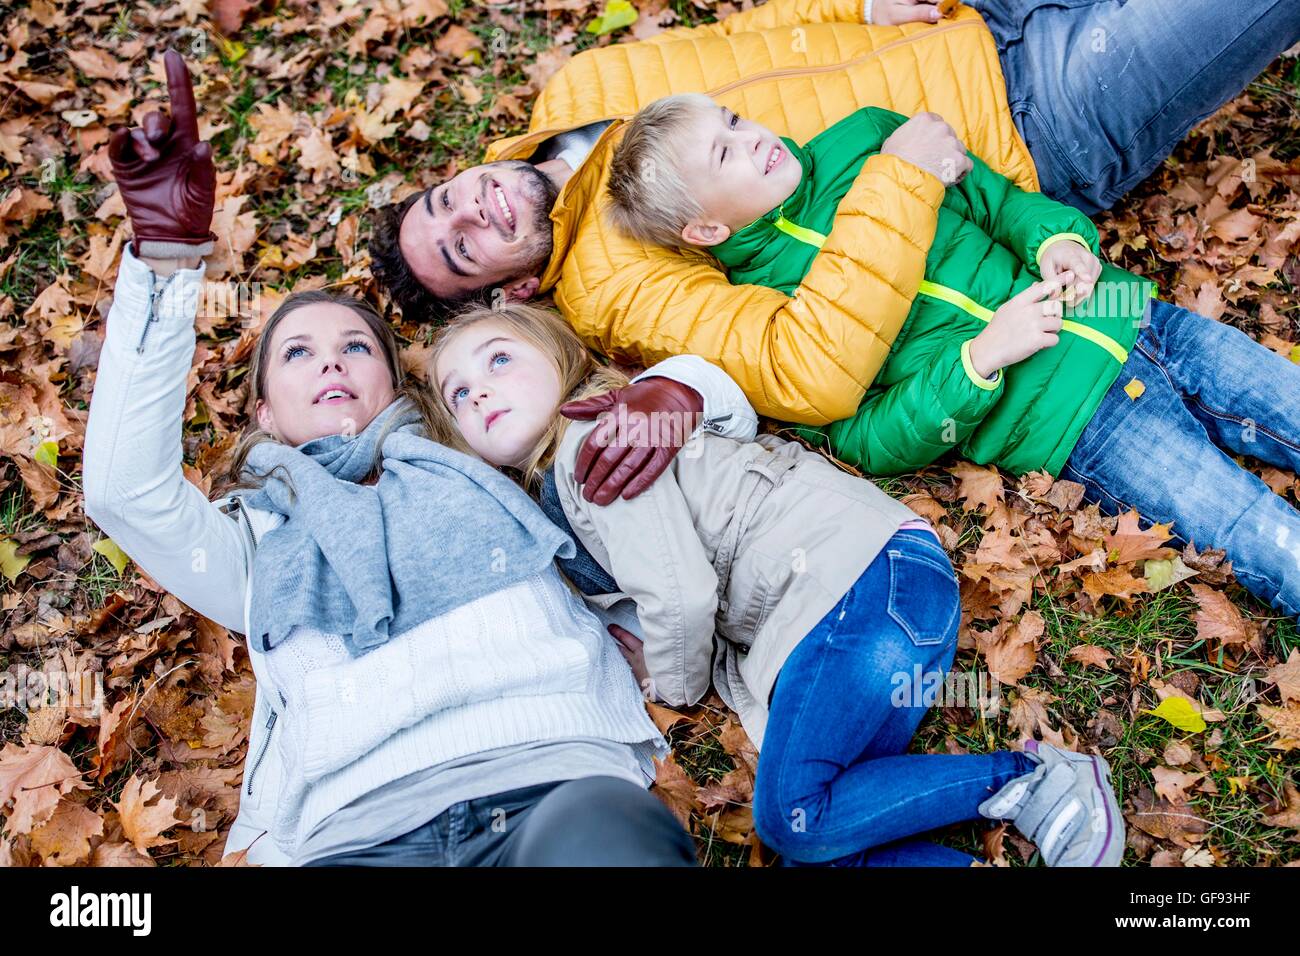 MODEL RELEASED. Family lying on dried leaves in autumn and smiling, mother pointing upwards. Stock Photo